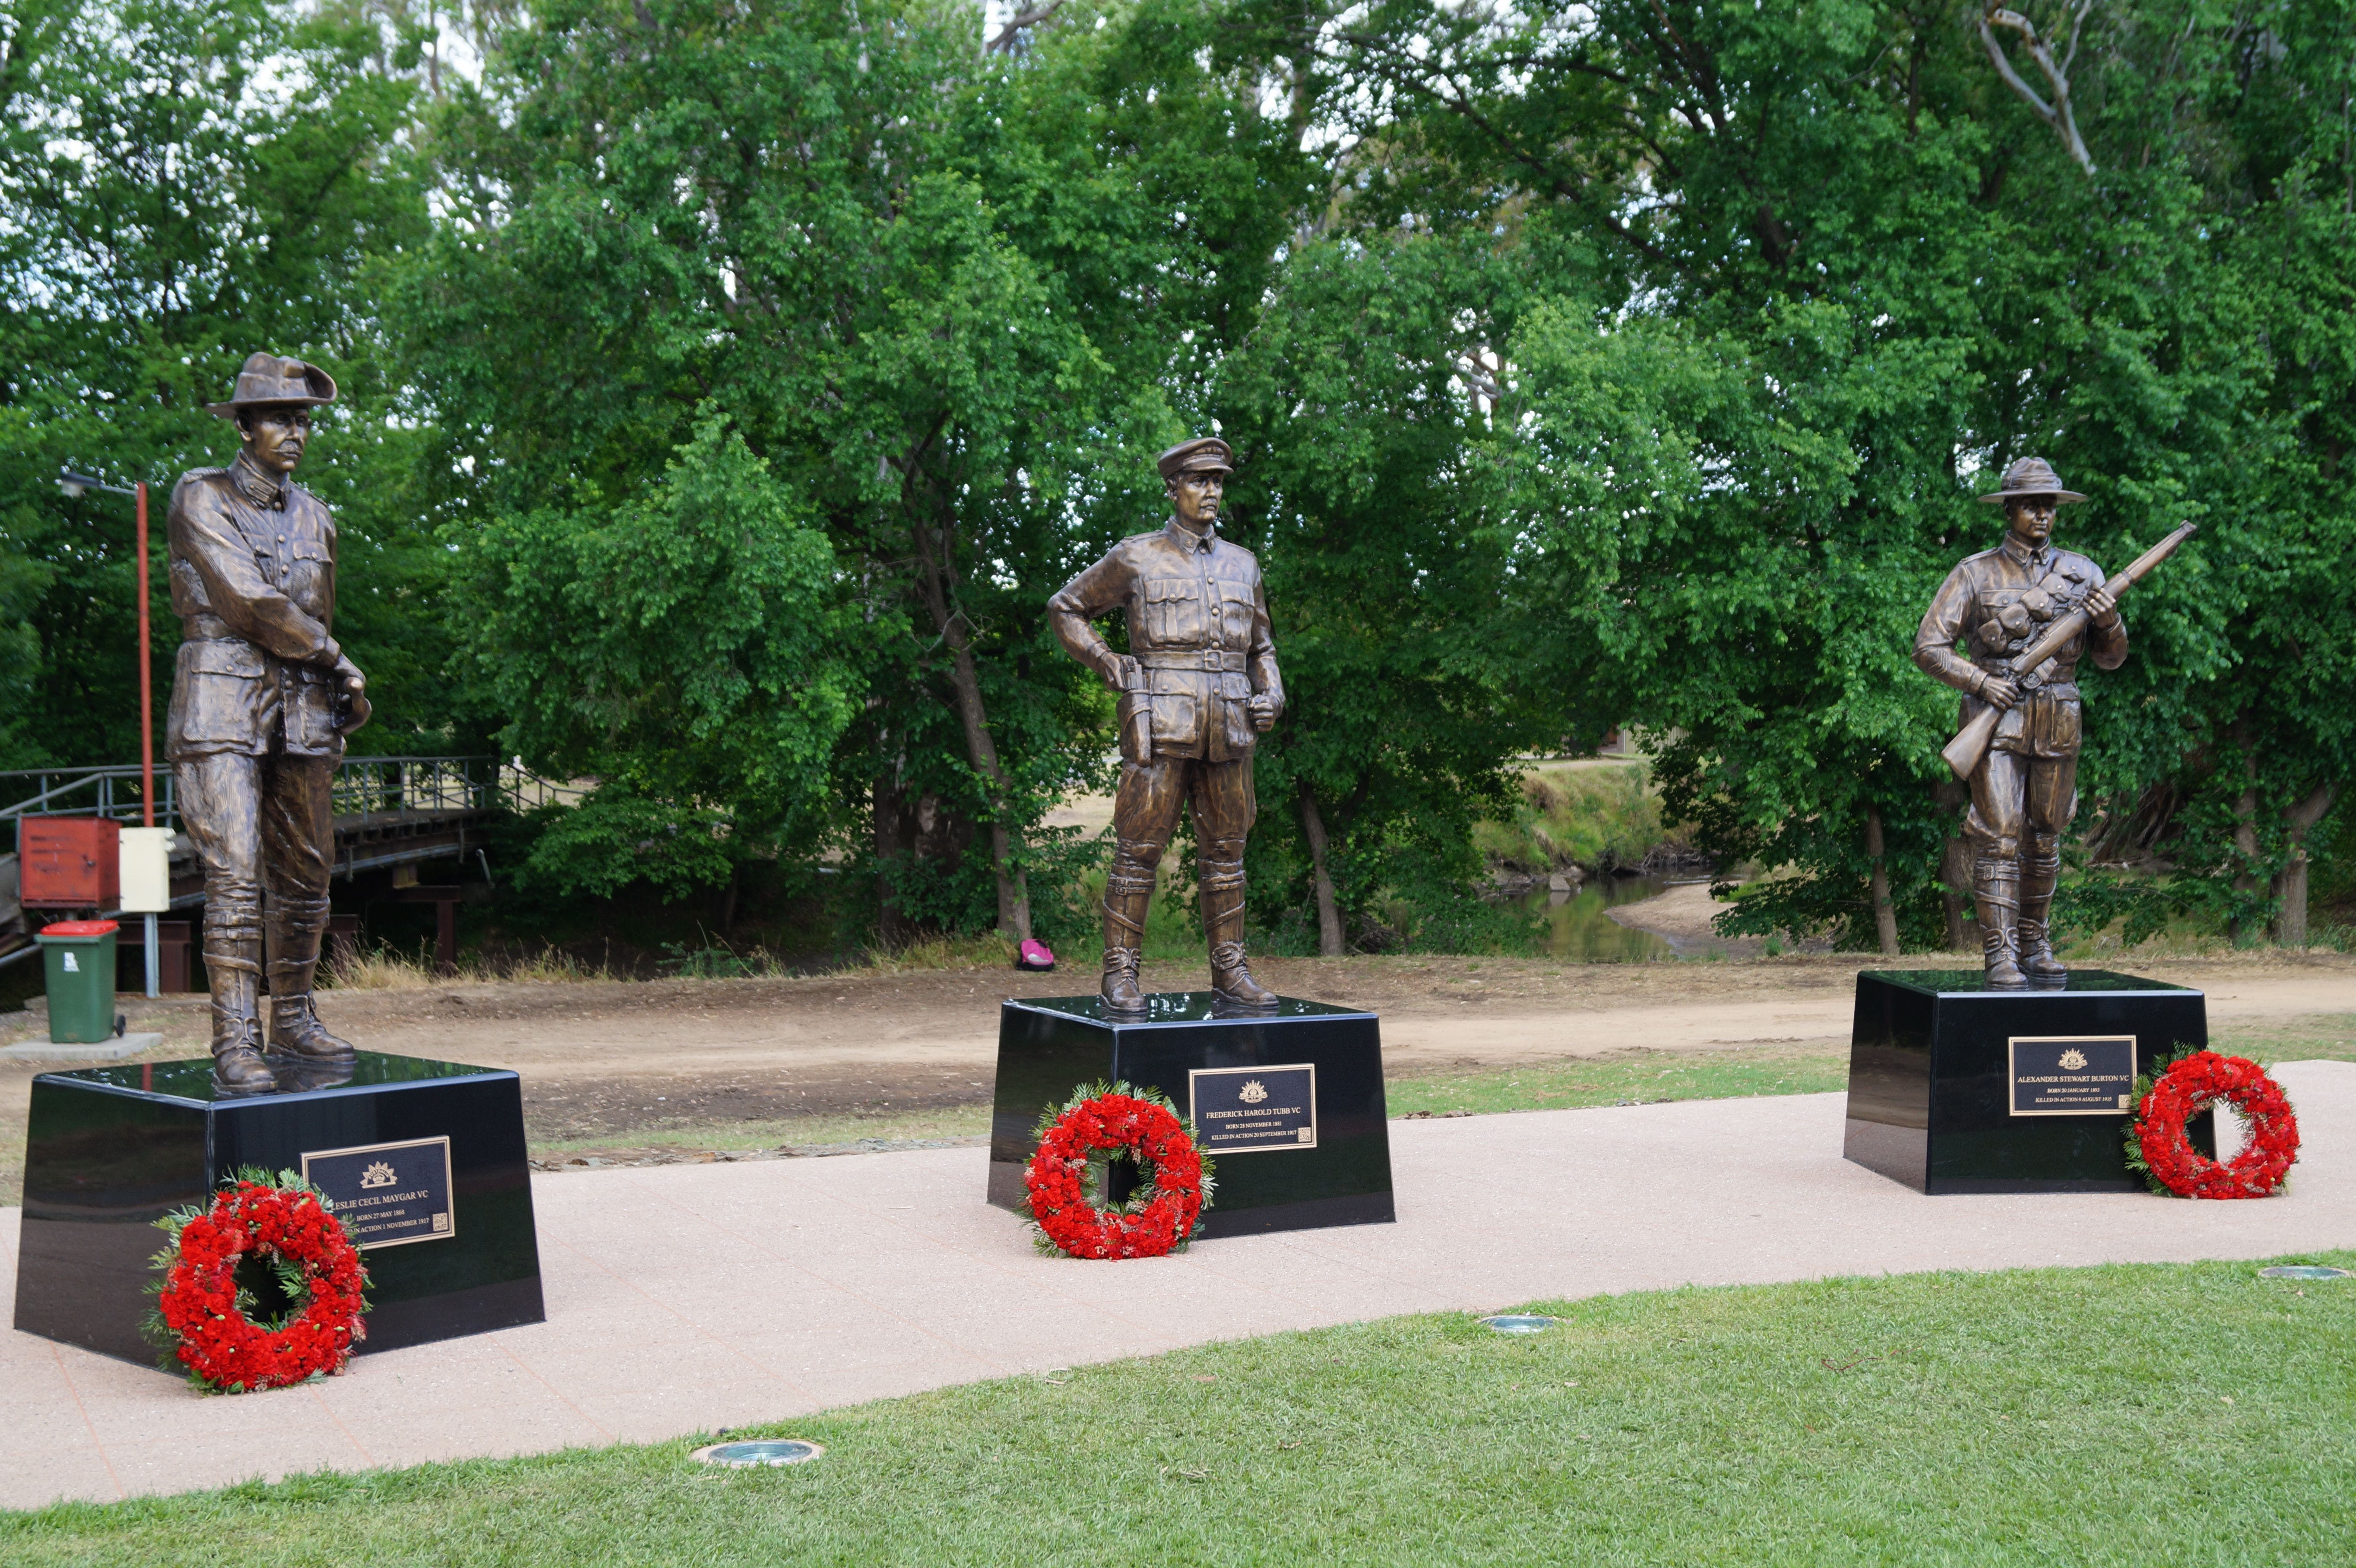 VC Memorial Park - Honouring Our Heroes - Redcliffe Tourism